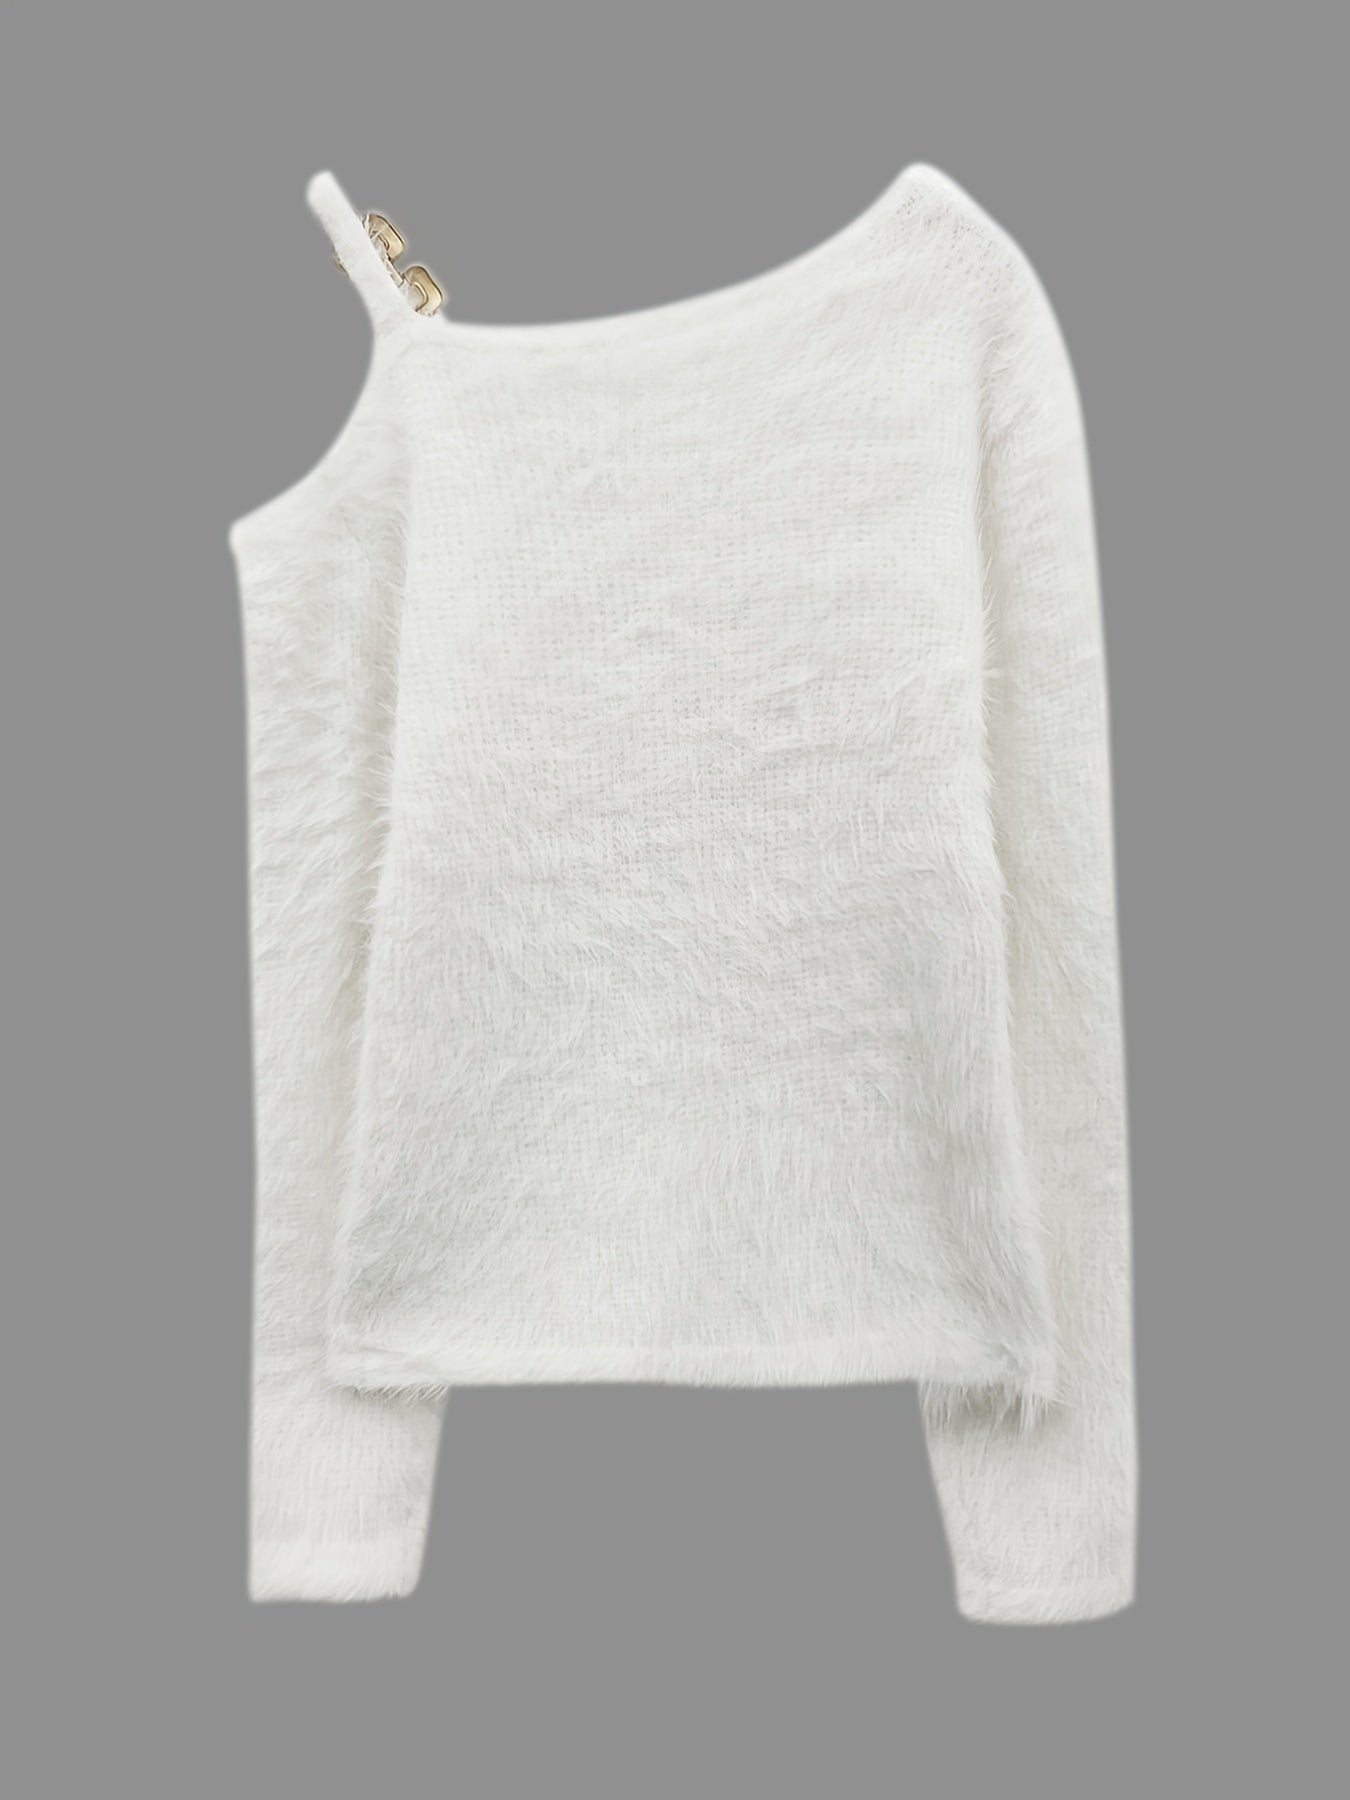 Fluffy Slanted Shoulder Knit Sweater, Casual Chain Long Sleeve Sweater, Women's Clothing